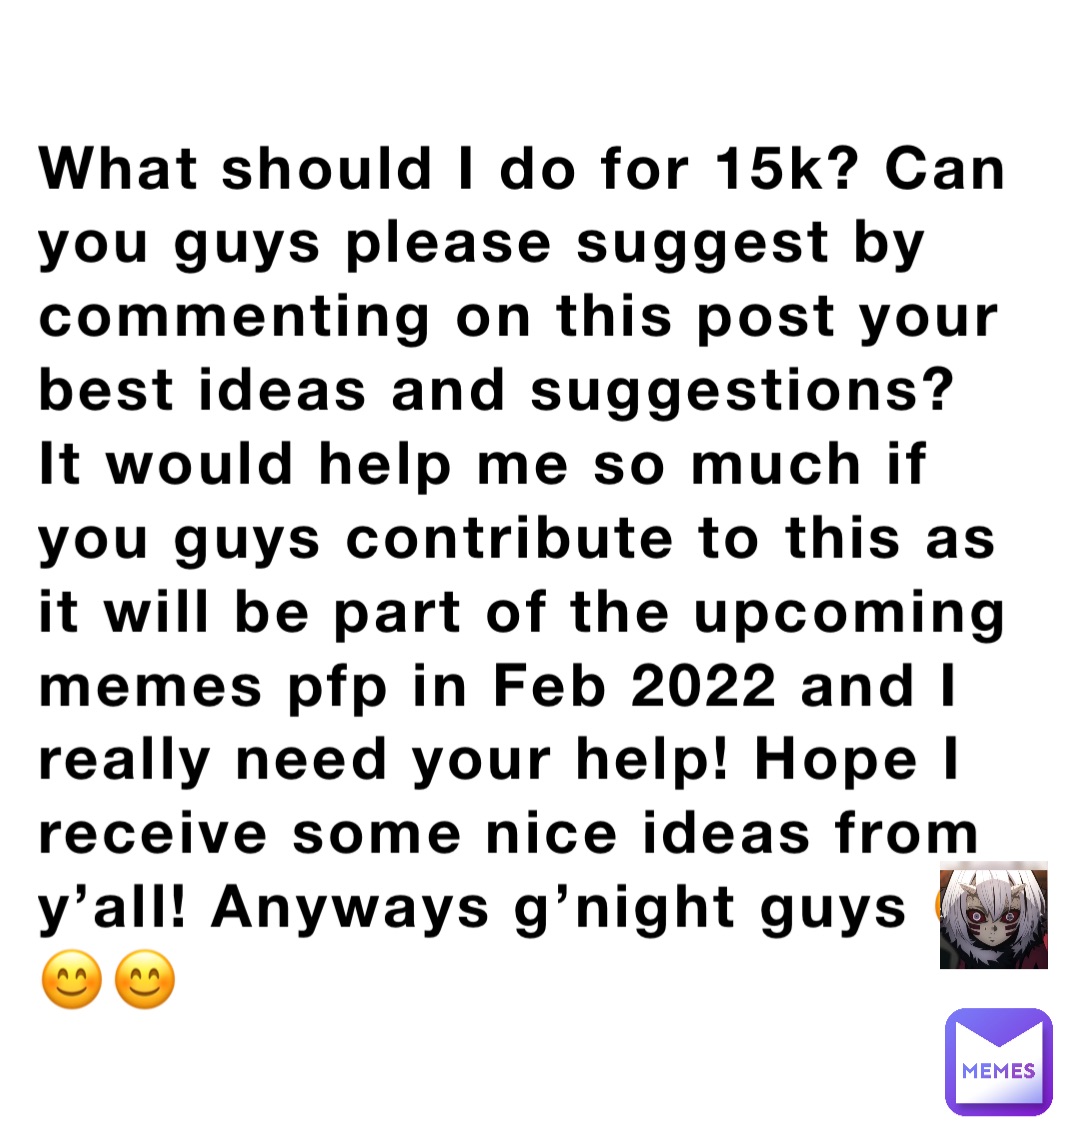 What should I do for 15k? Can you guys please suggest by commenting on this post your best ideas and suggestions? It would help me so much if you guys contribute to this as it will be part of the upcoming memes pfp in Feb 2022 and I really need your help! Hope I receive some nice ideas from y’all! Anyways g’night guys 😊😊😊